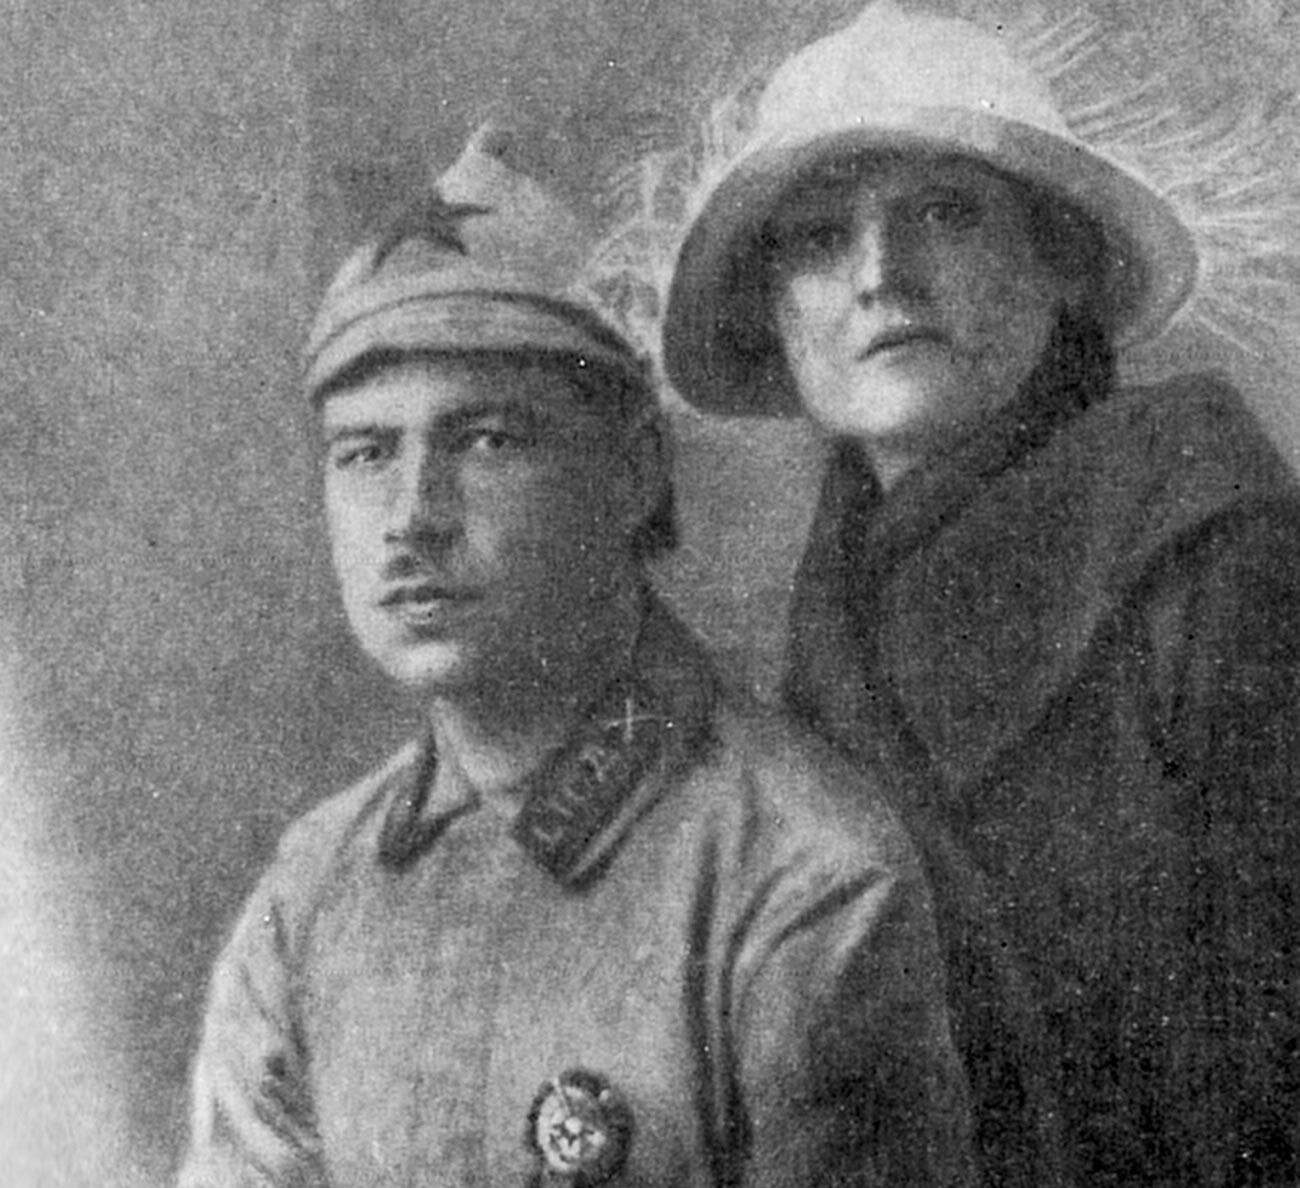 Leonid Govorov with his wife in 1923.